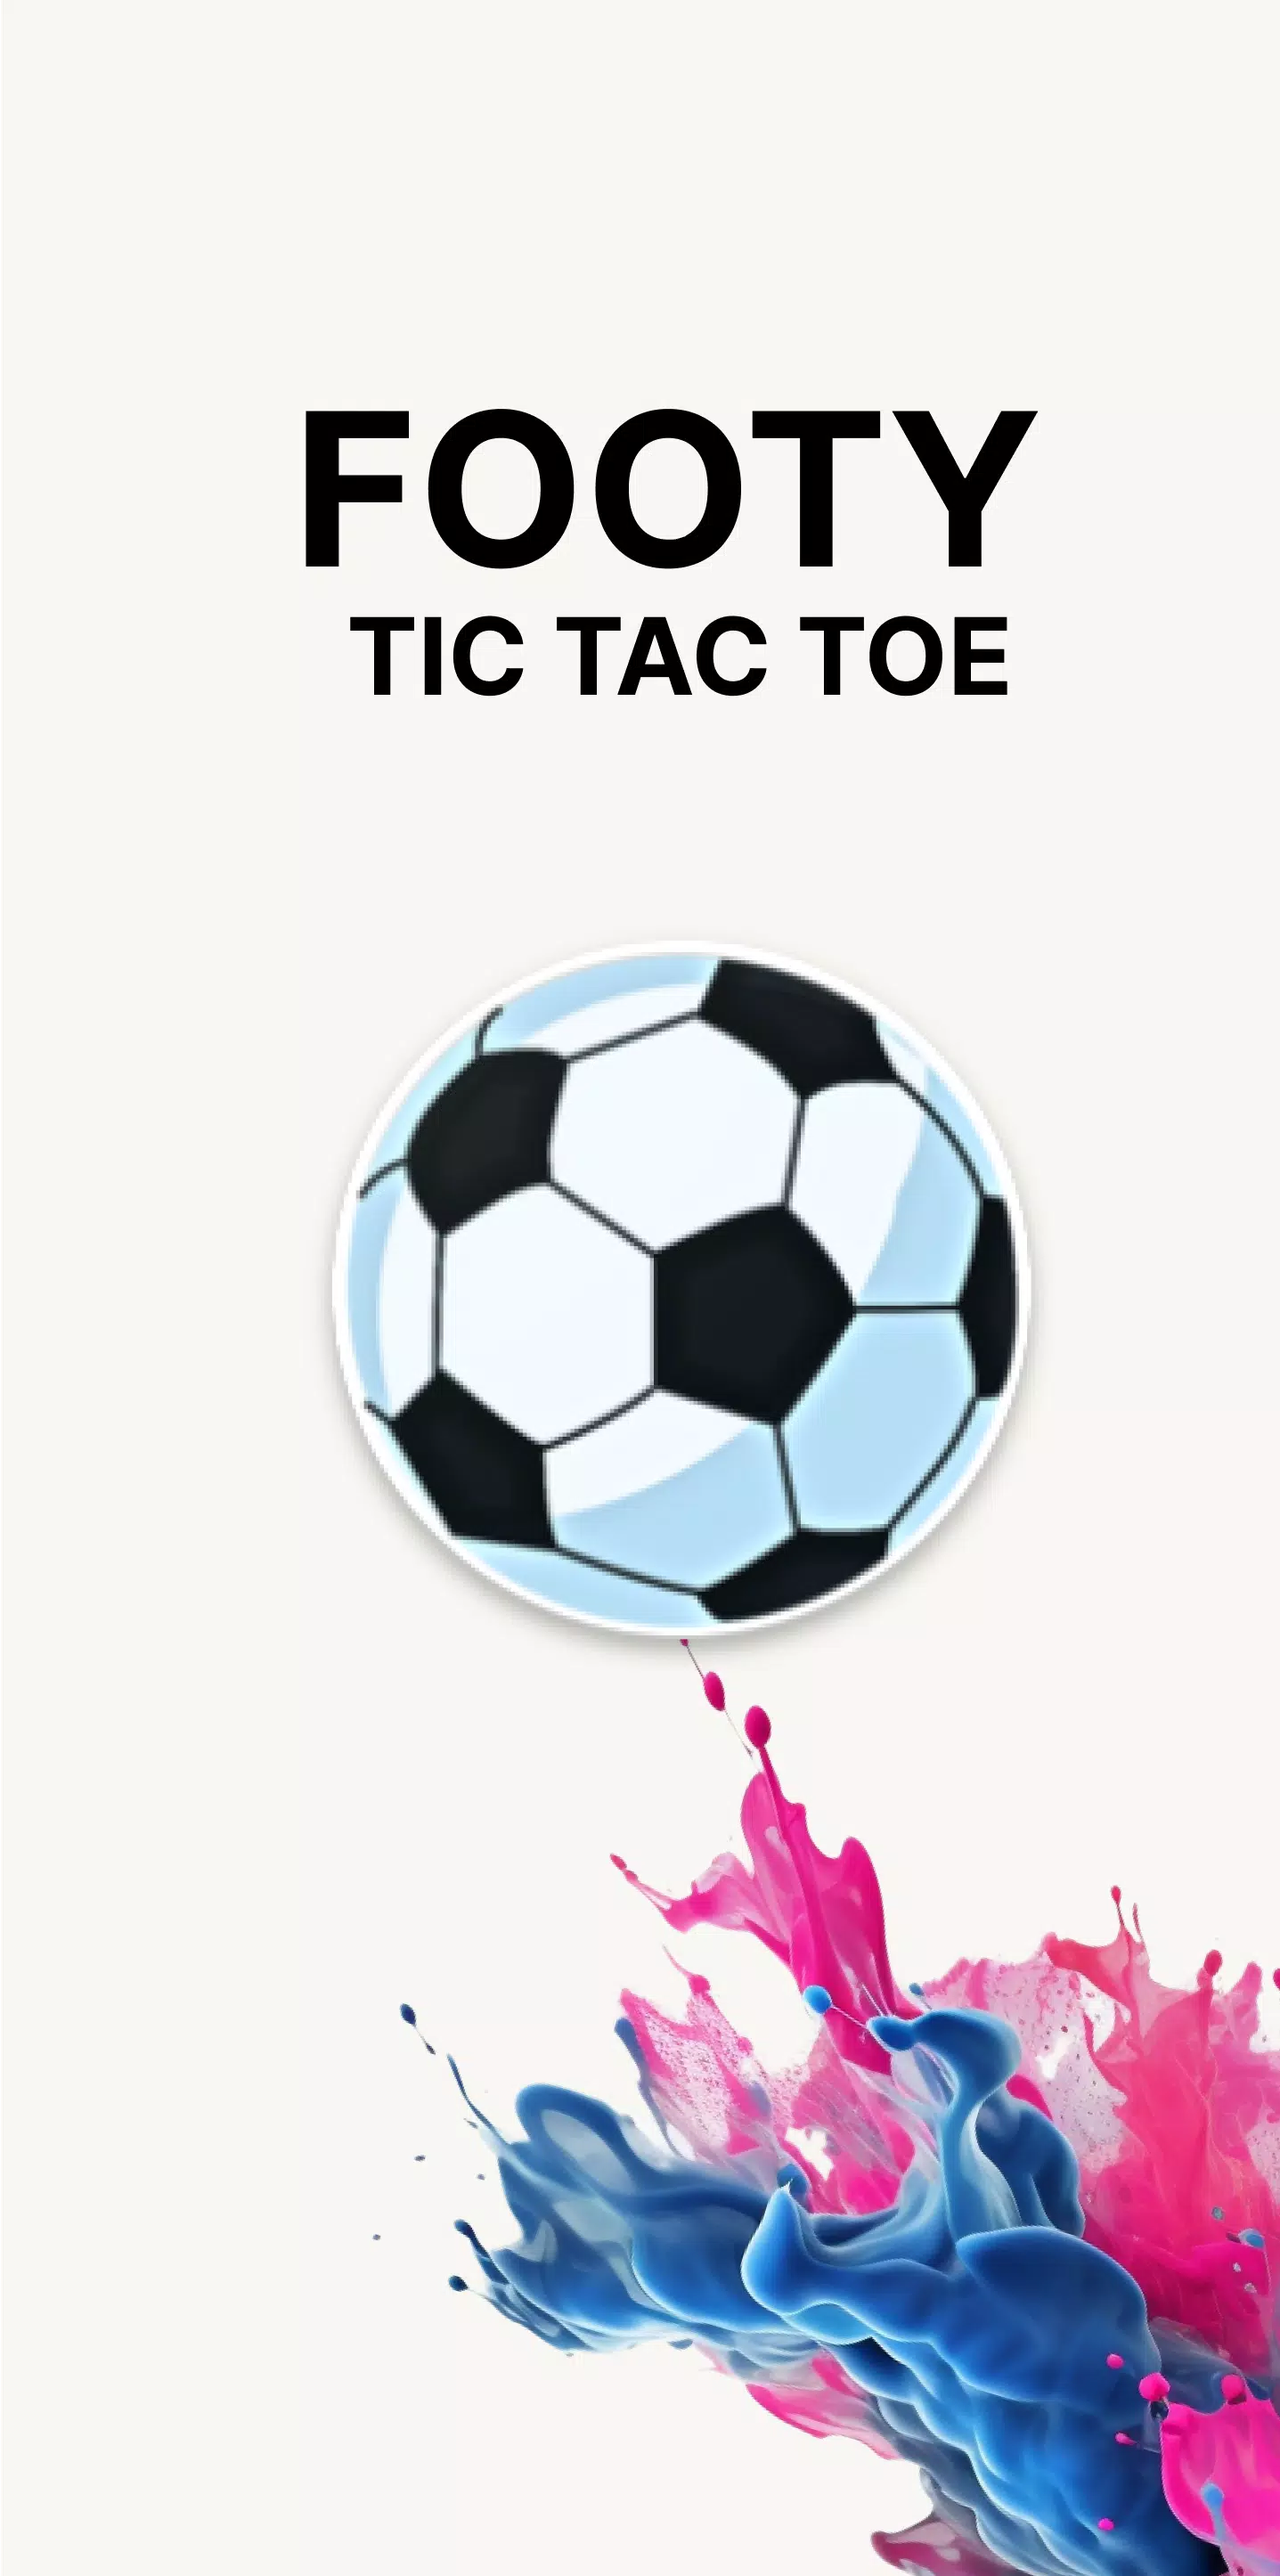 footy tic tac toe part 1 #footytictactoe#football #soccer #fyp #foryou